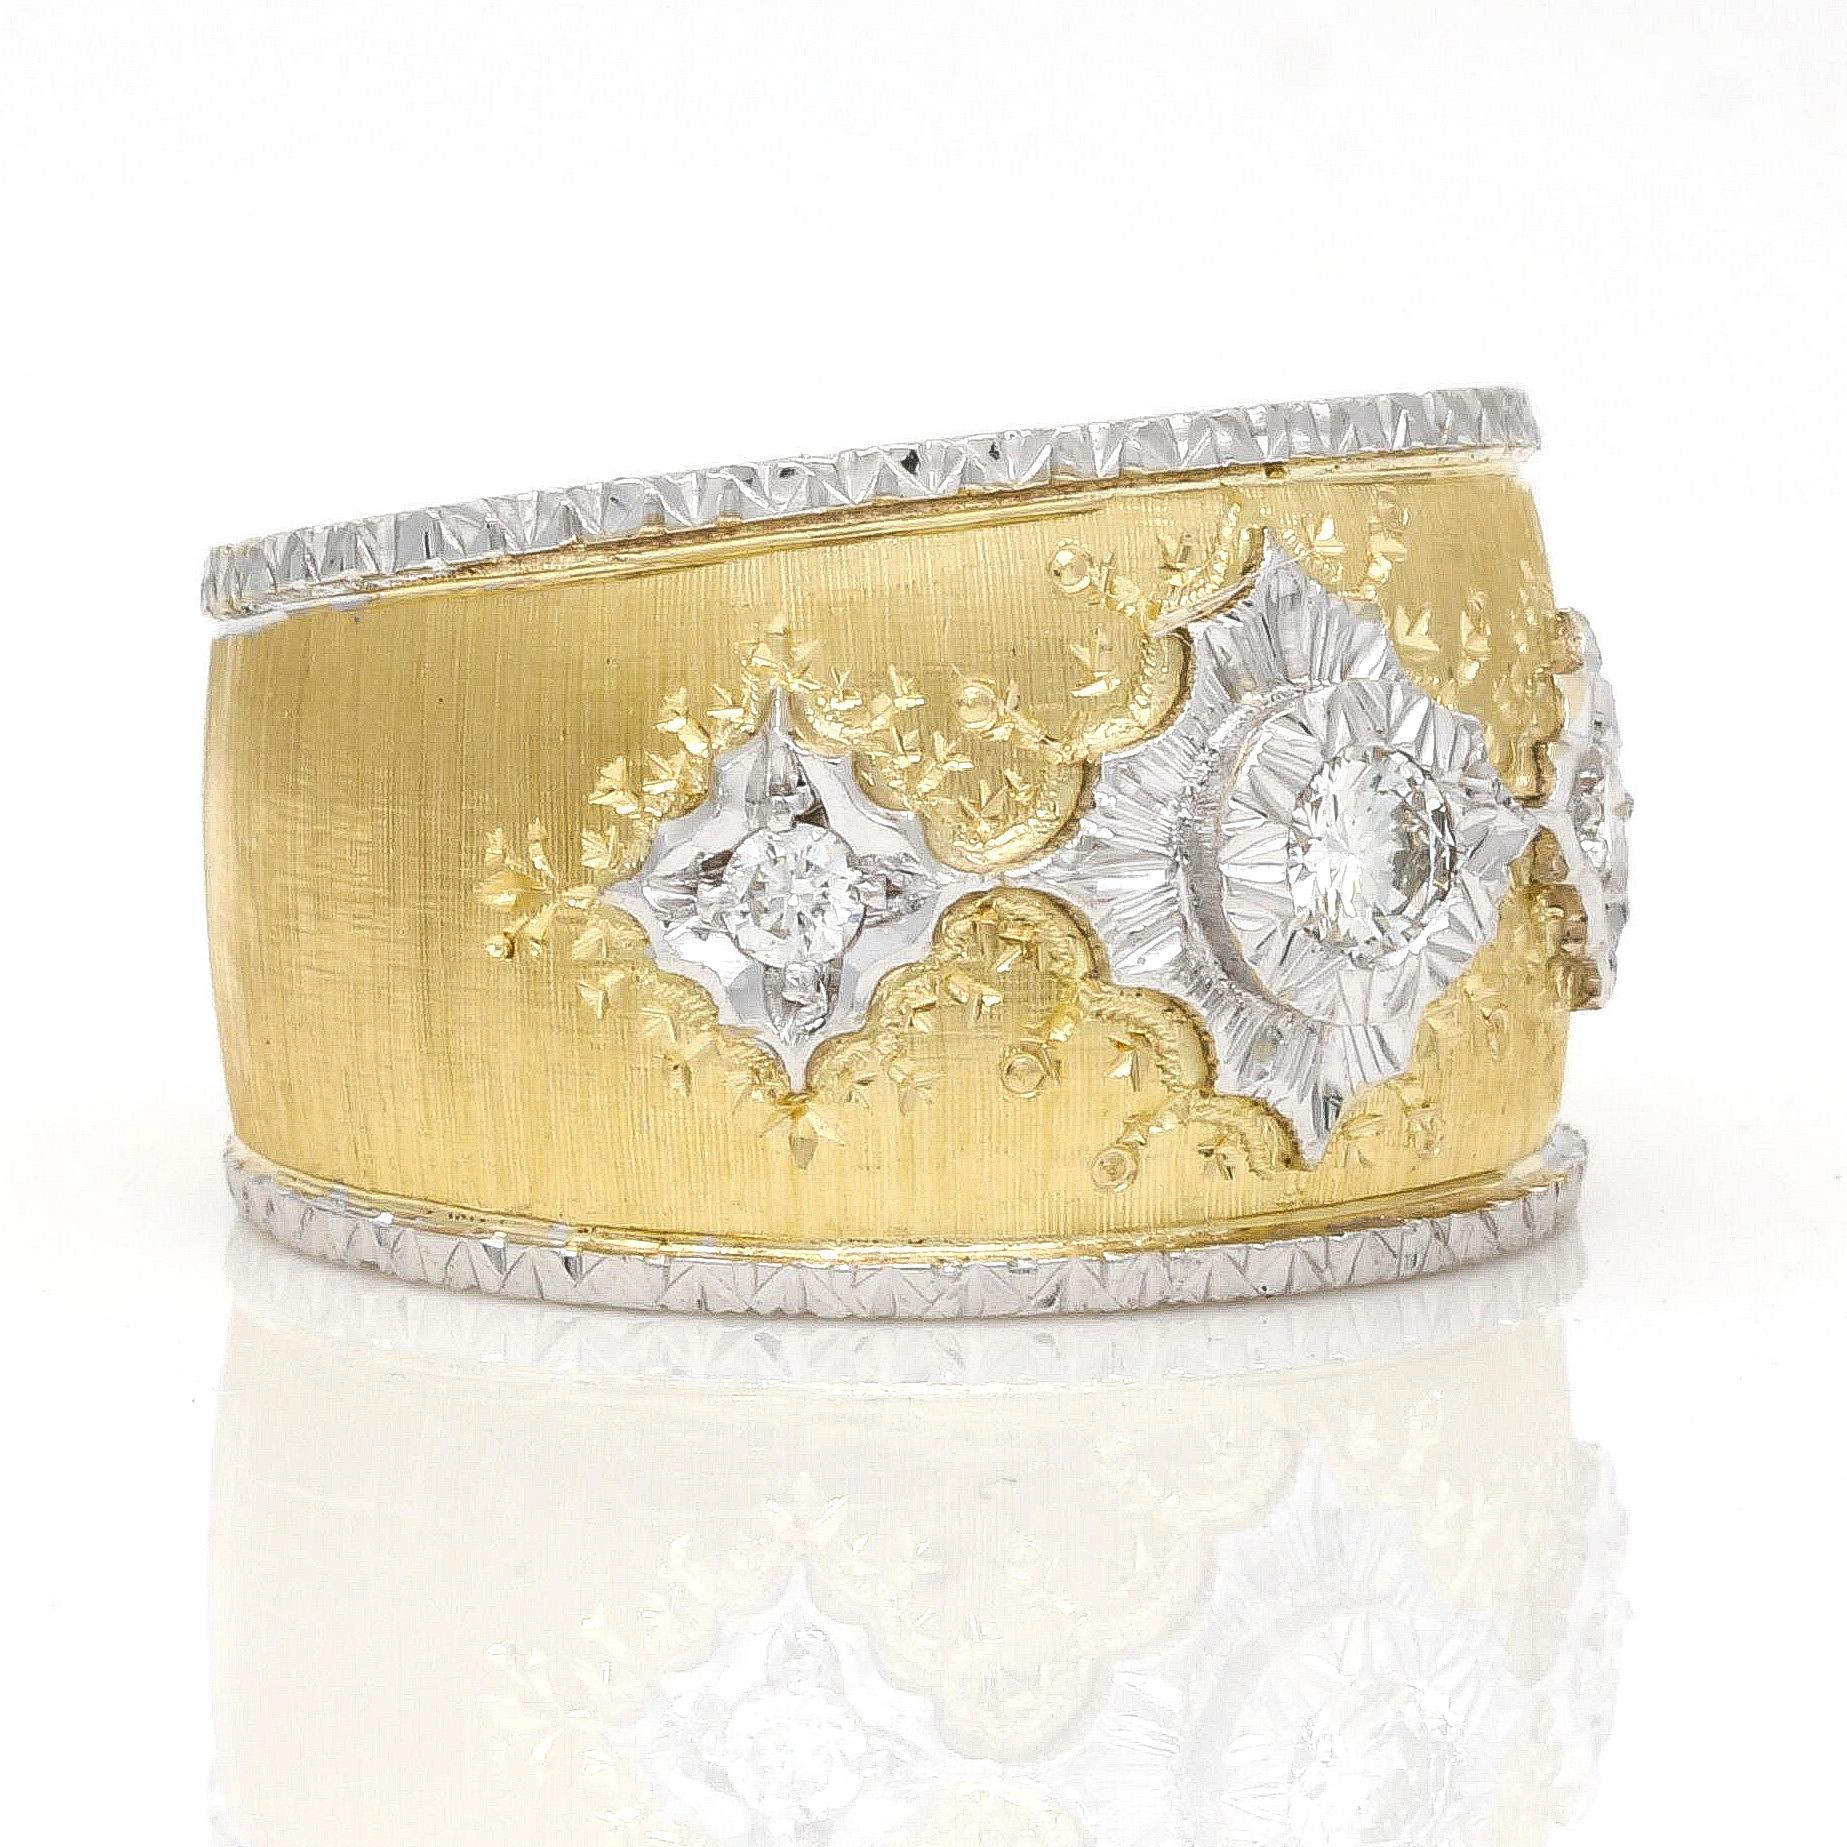 This Italian handcrafted diamond statement ring in 18k yellow gold is a magnificent piece of fine jewelry. It features a beautiful hand-engraved design, set with diamonds and signed with the Italian jewelry registry mark * 893 FI. A beautiful,